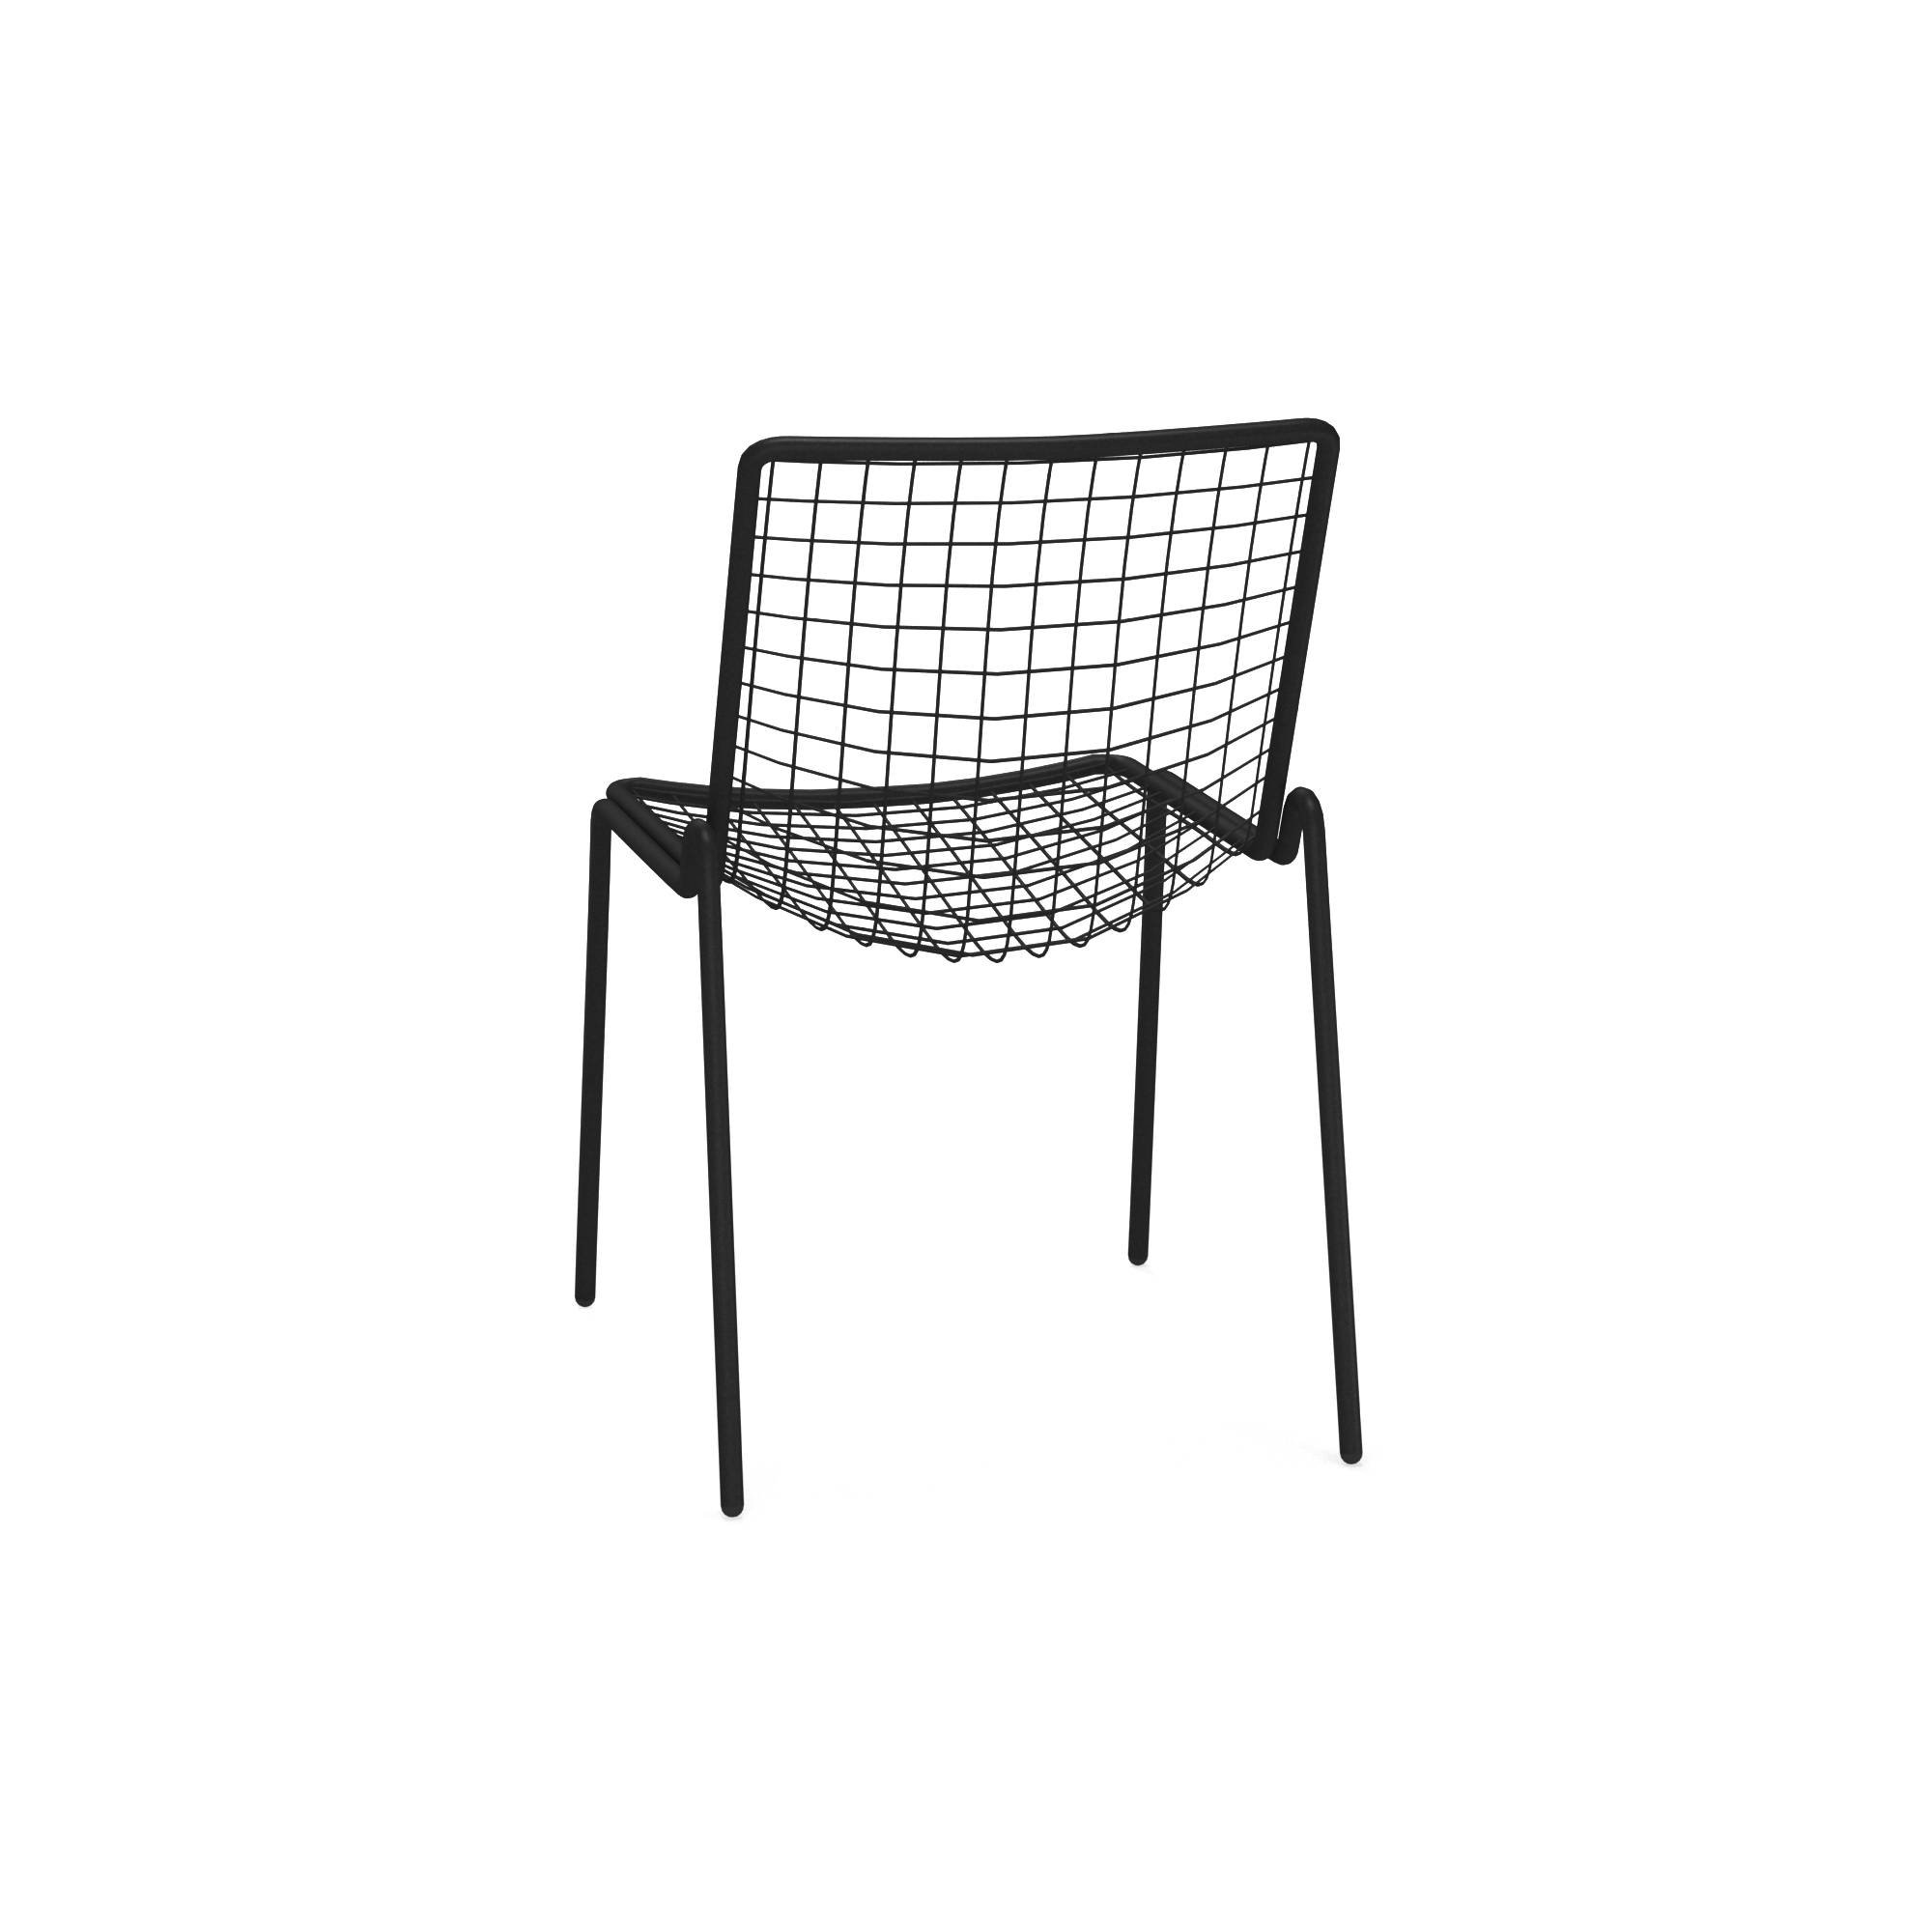 Rio R50 Chair from Emu, designed by Gargano & Cristell